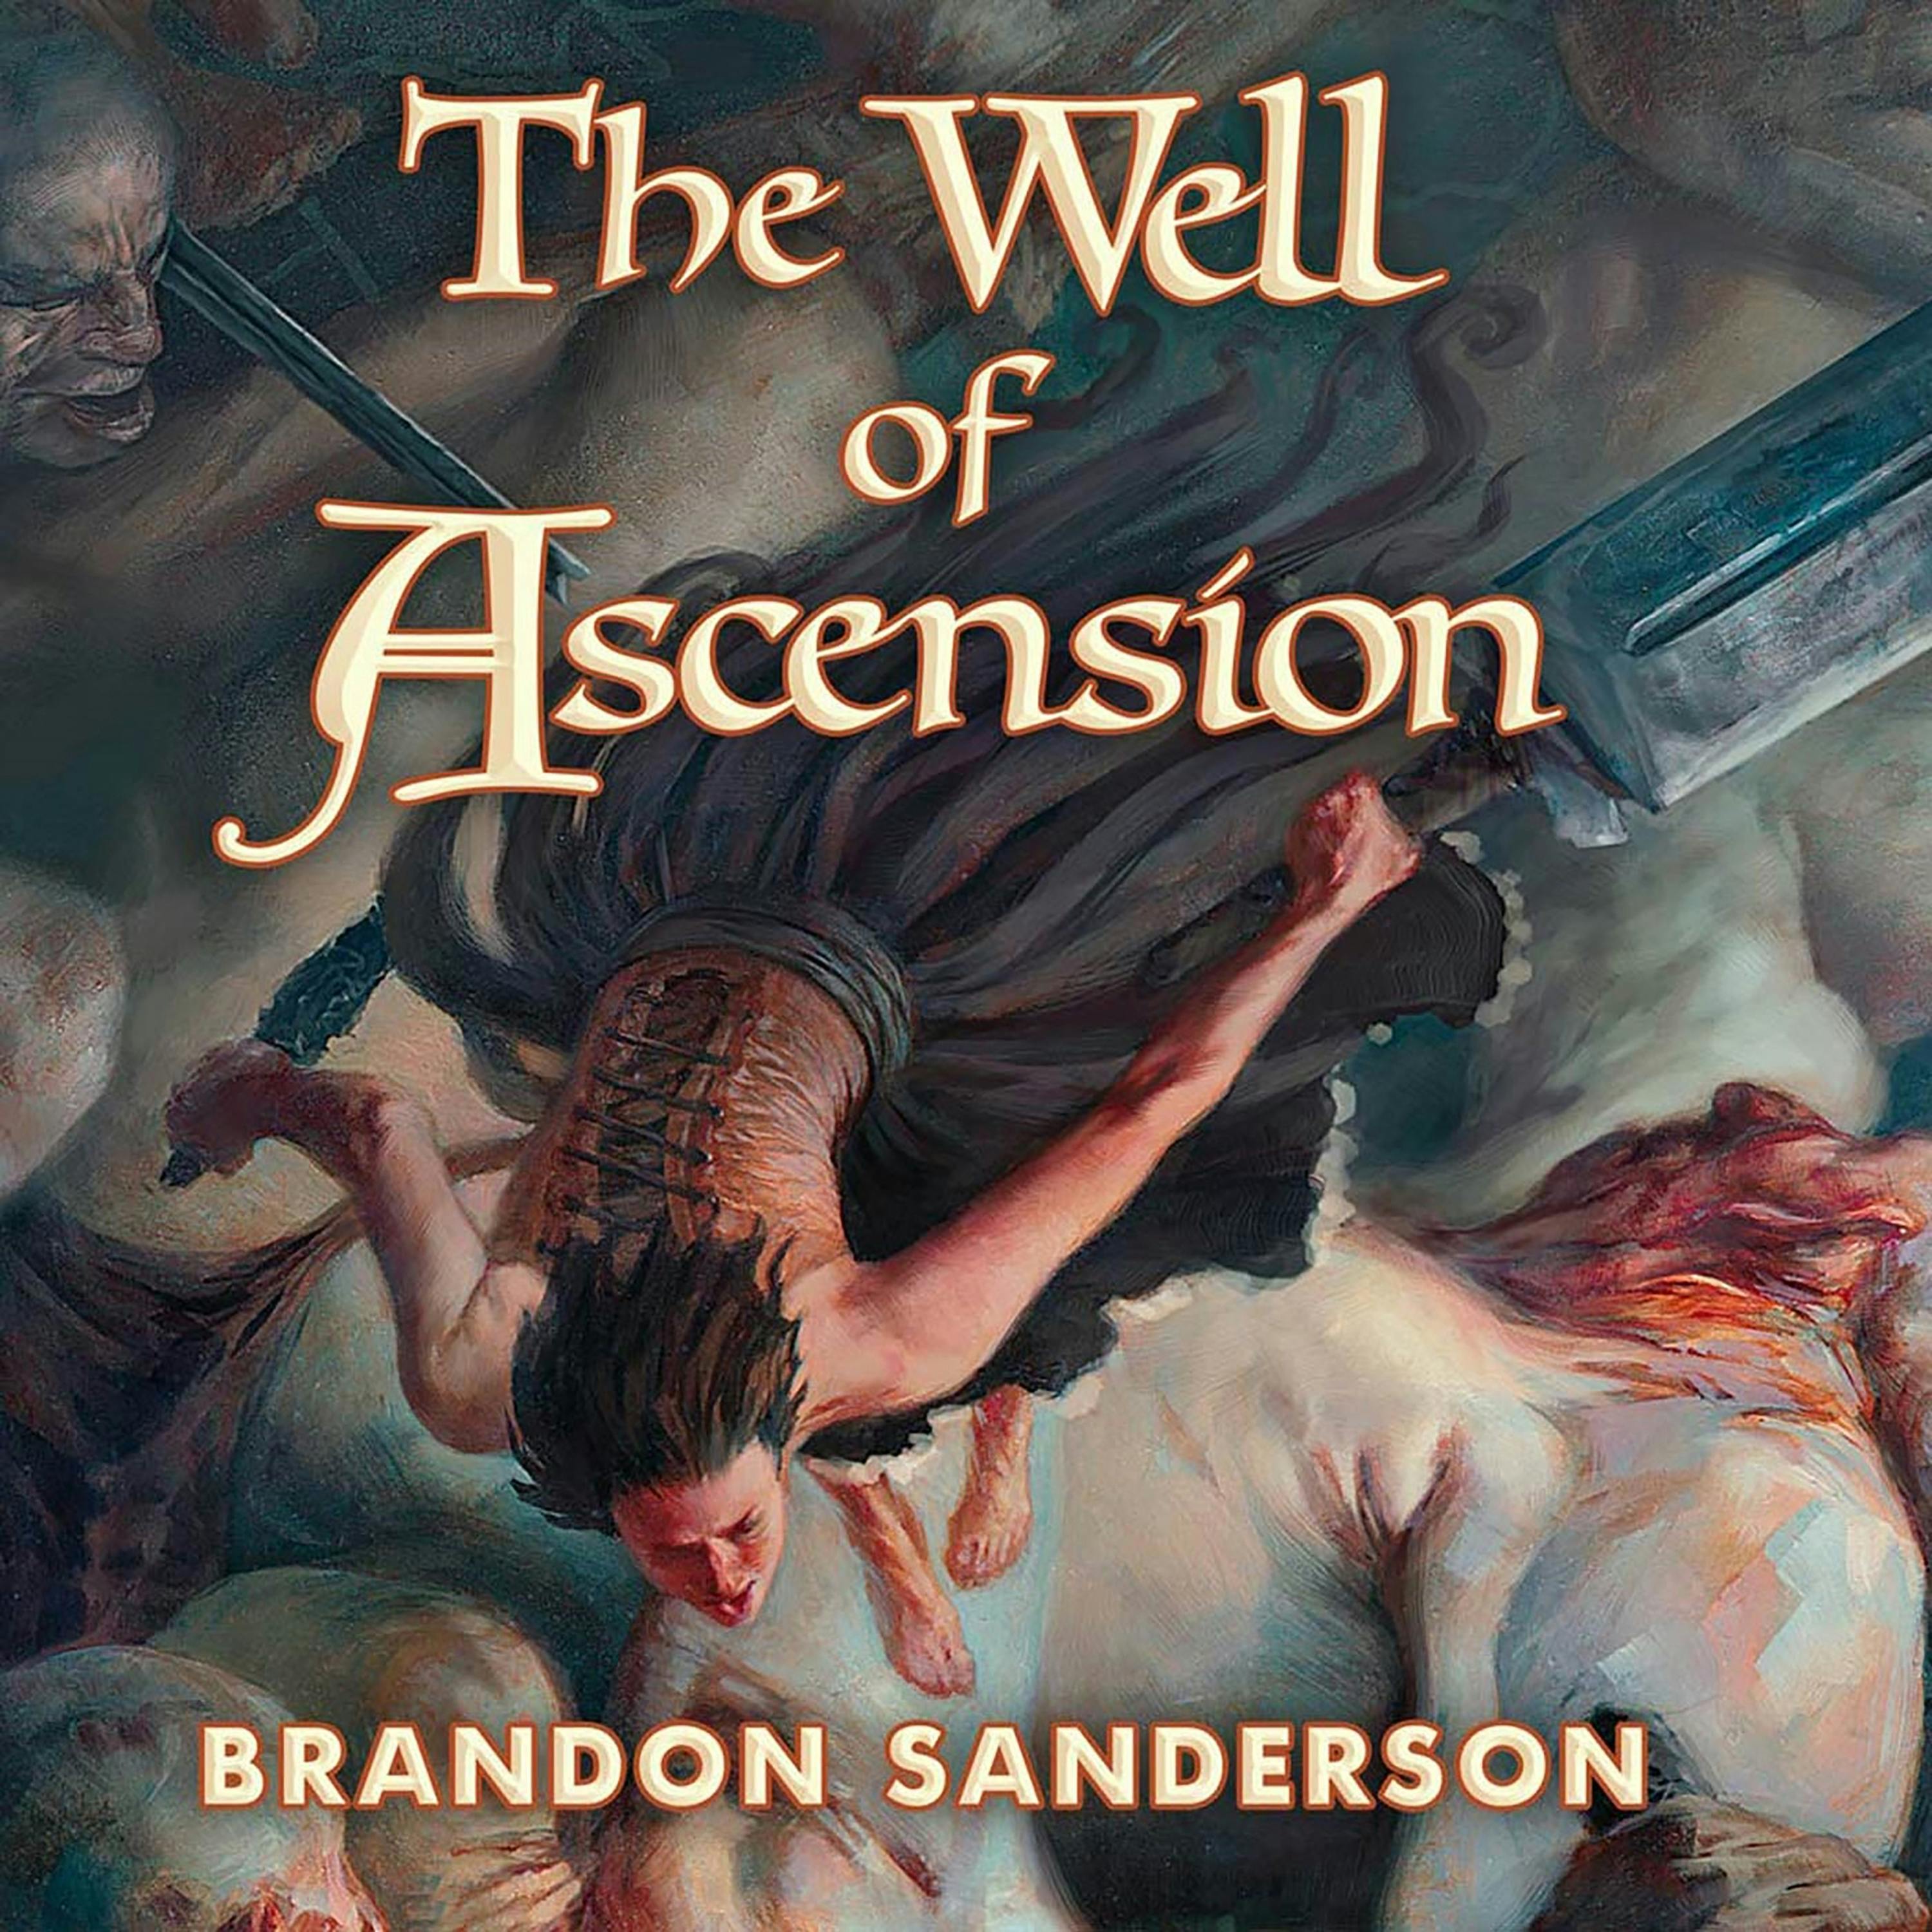 Mistborn Novel Series by Brandon Sanderson - Graphical Character